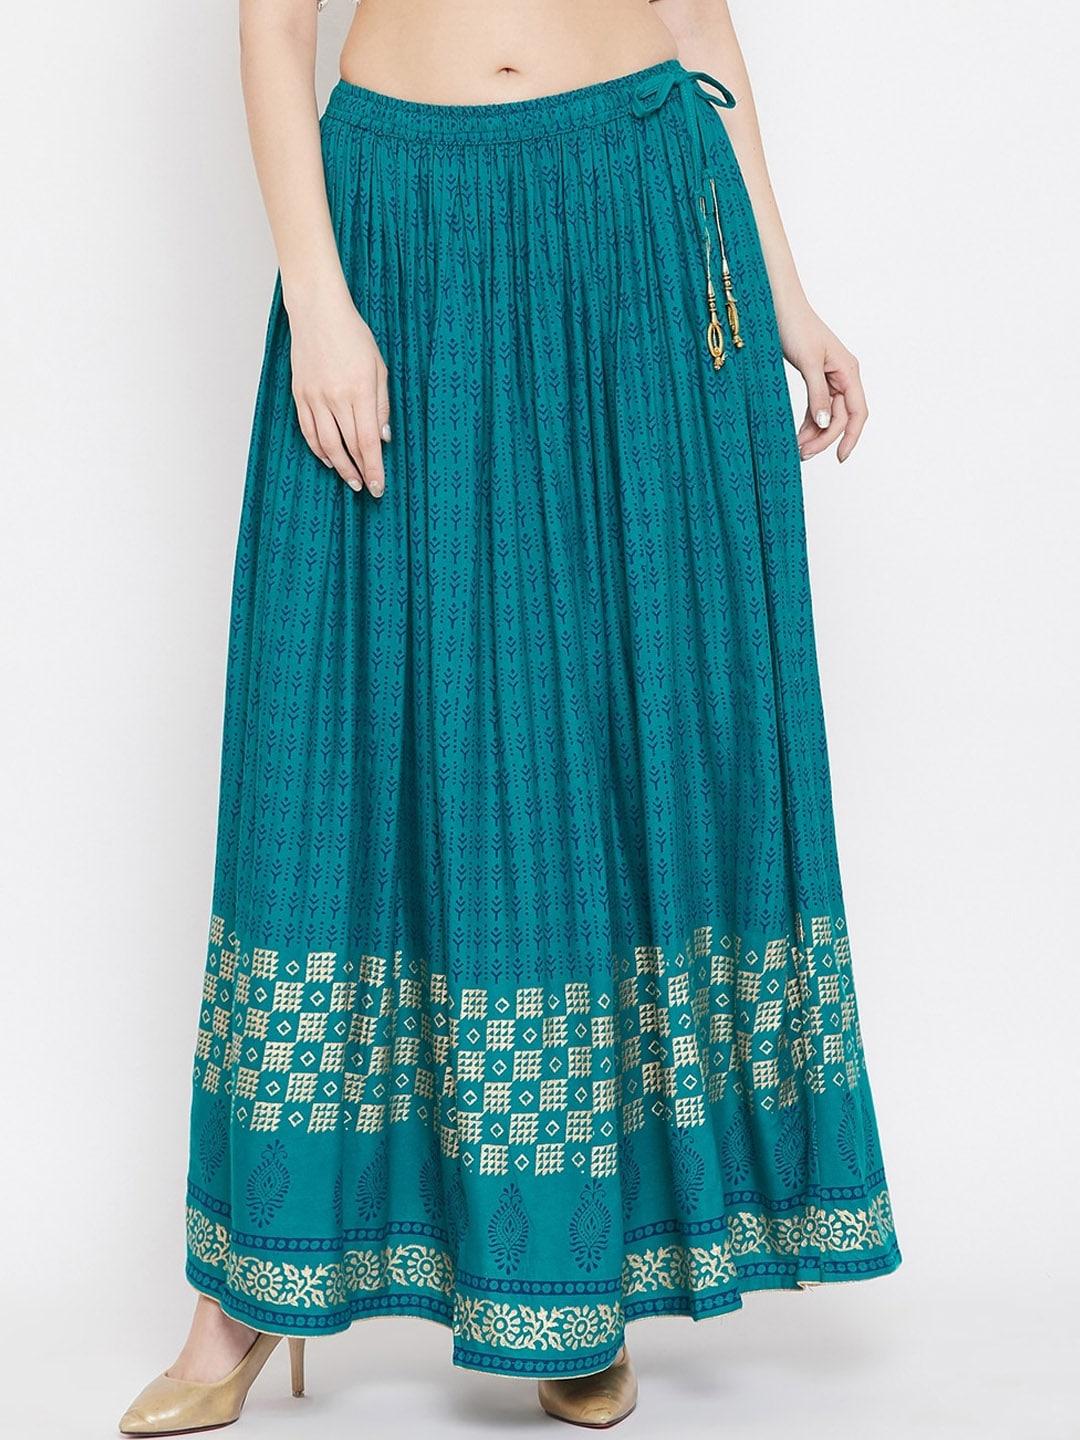 clora-creation-women-teal-blue-&-gold-colored-geometric-printed-flared-maxi-skirt